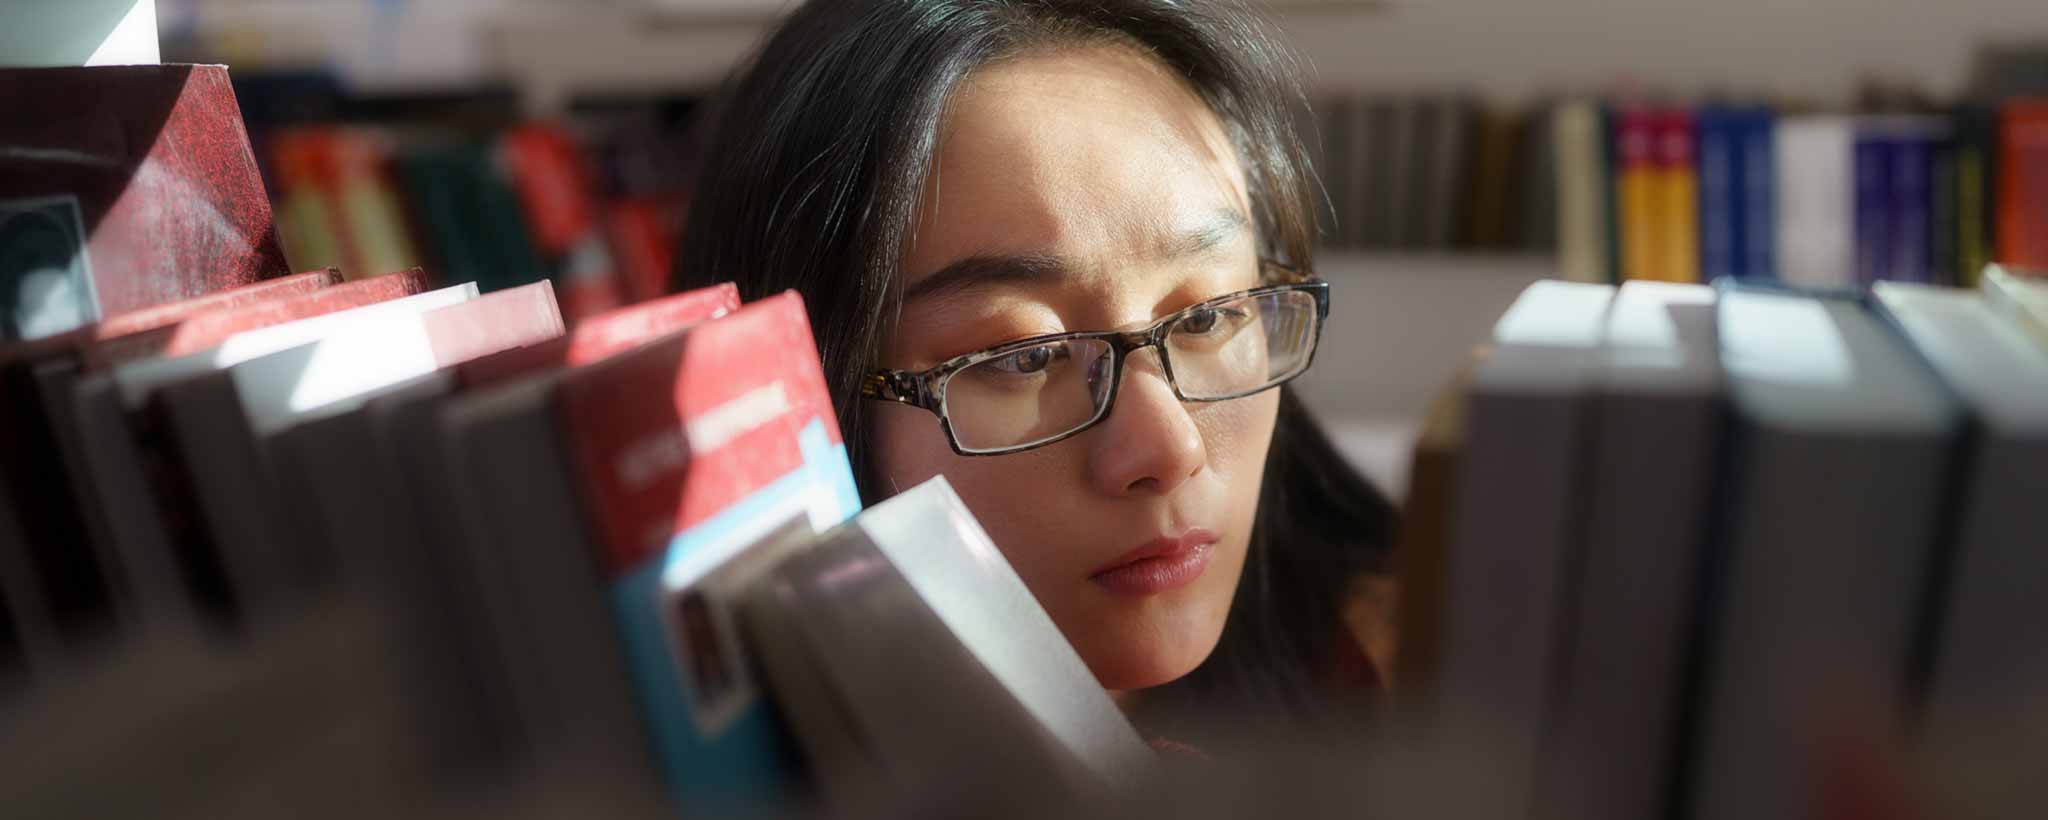 'Female looking through library books'